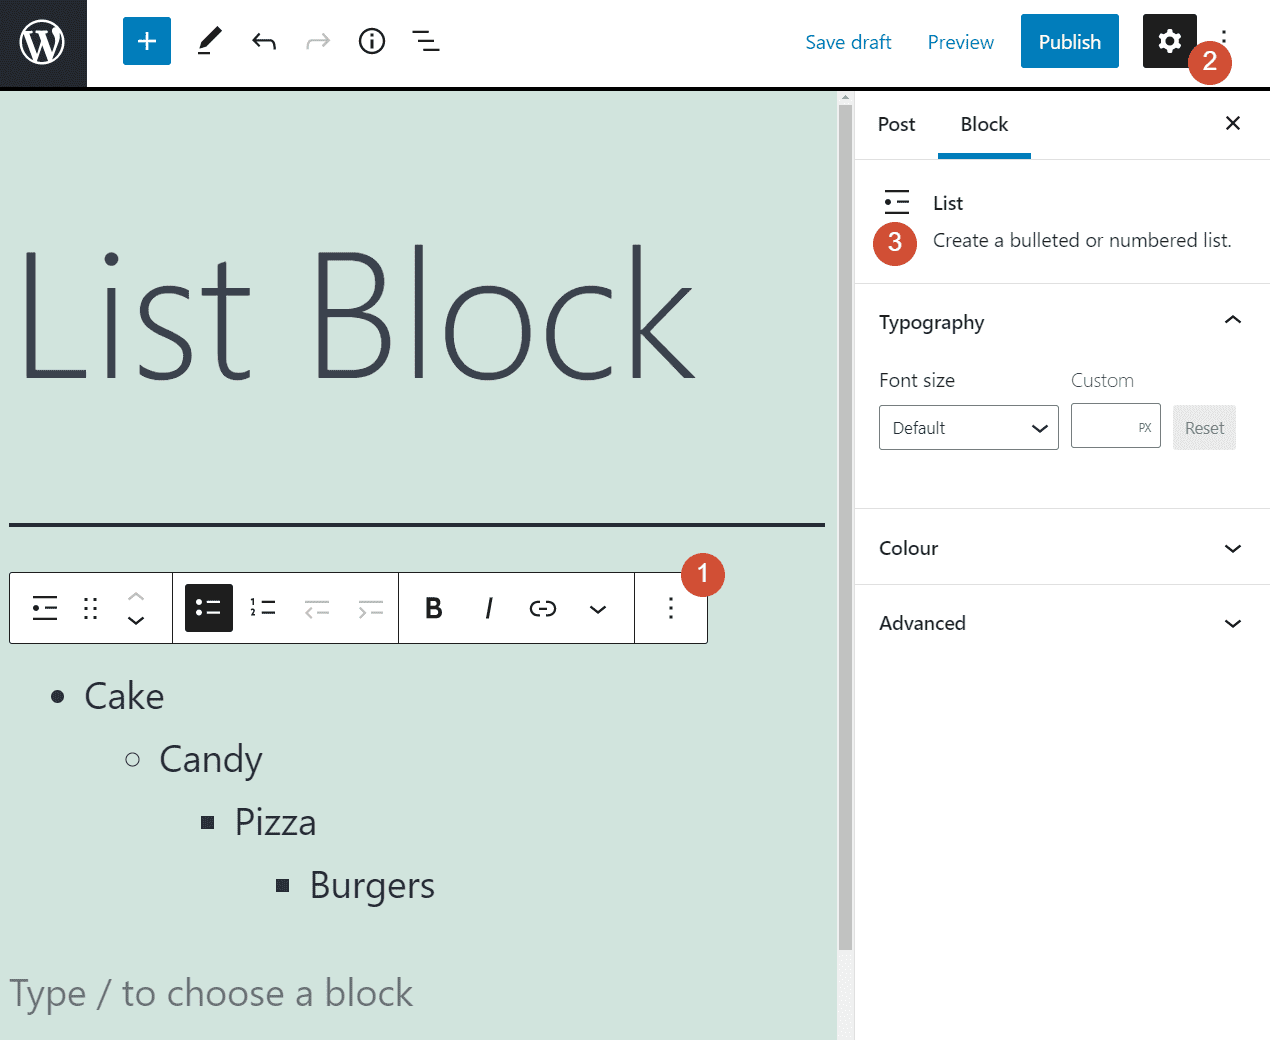 Accessing the List block settings and options